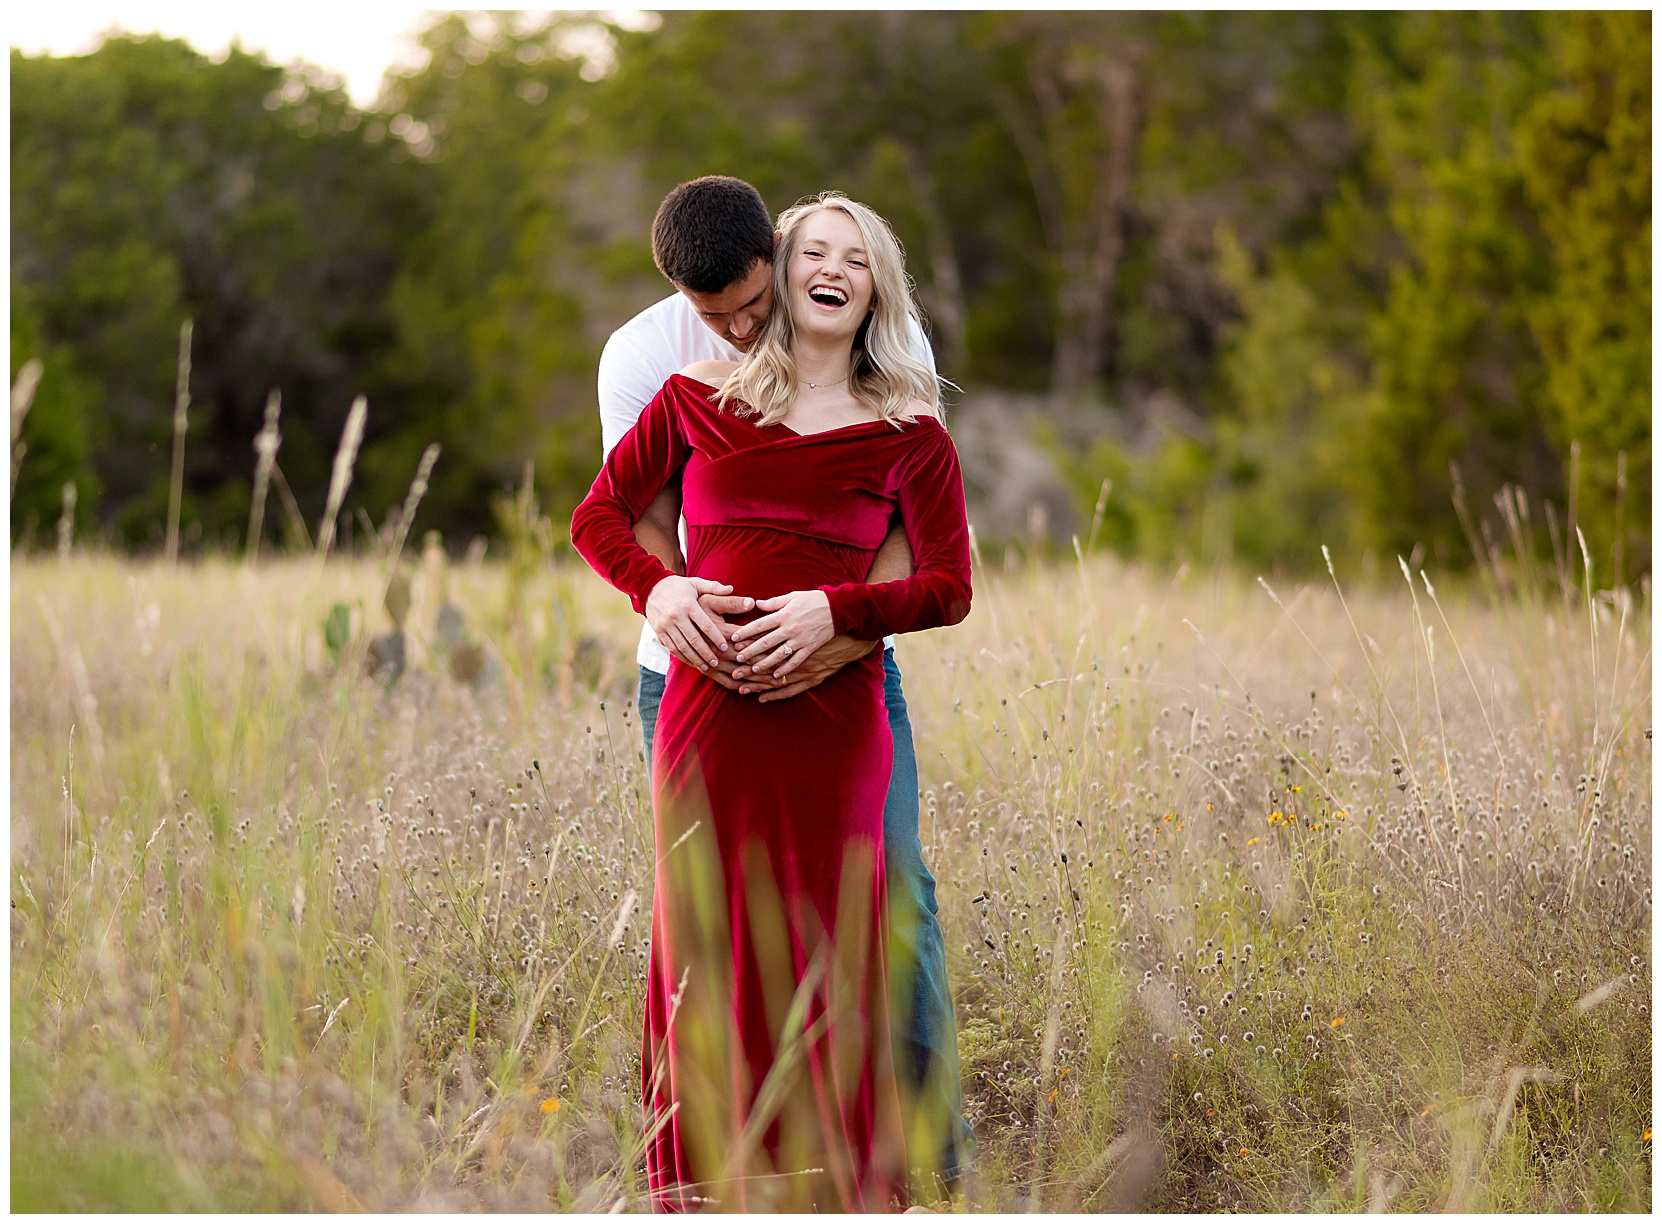 photo man and pregnant woman laughing together in a field